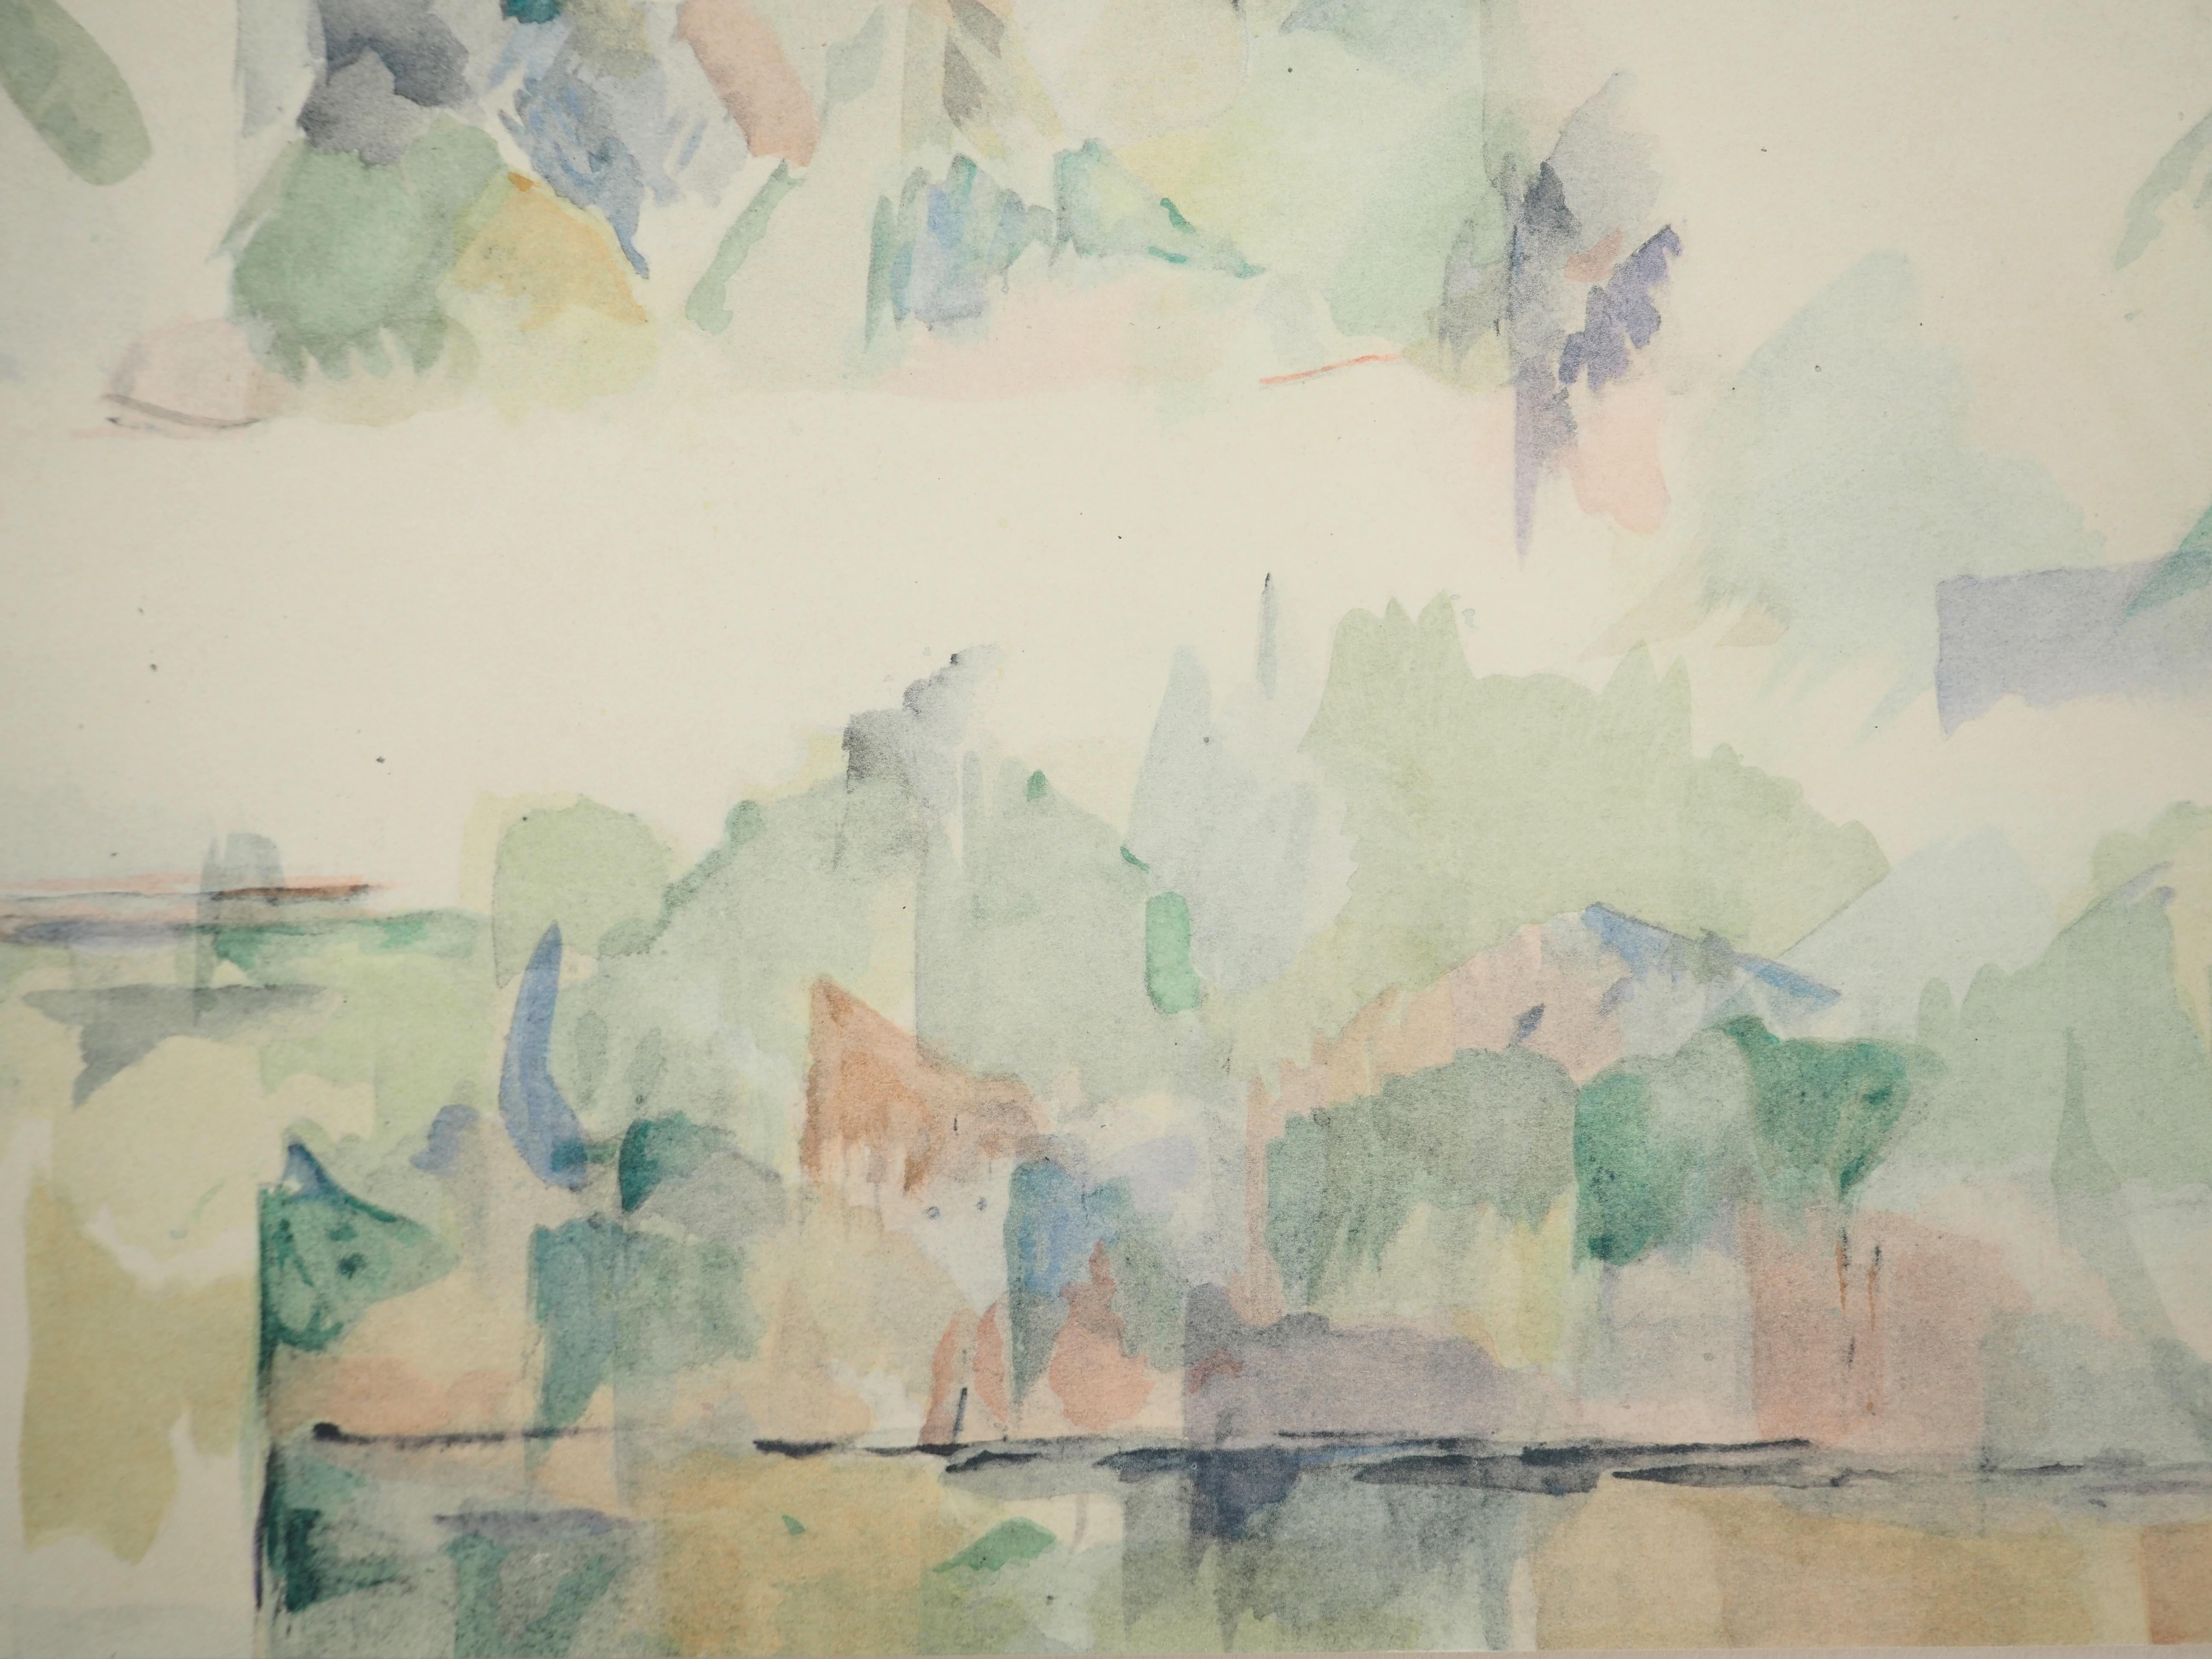 Paul Cezanne
View from the lake, 1971

Lithograph and stencil (Jacomet workshop)
Unsigned
Numbered / 225
On paper applied on Arches vellum 53.5 x 41.5 cm (c. 21 x 16.5 in)

INFORMATION : This lithograph is part of the portfolio 